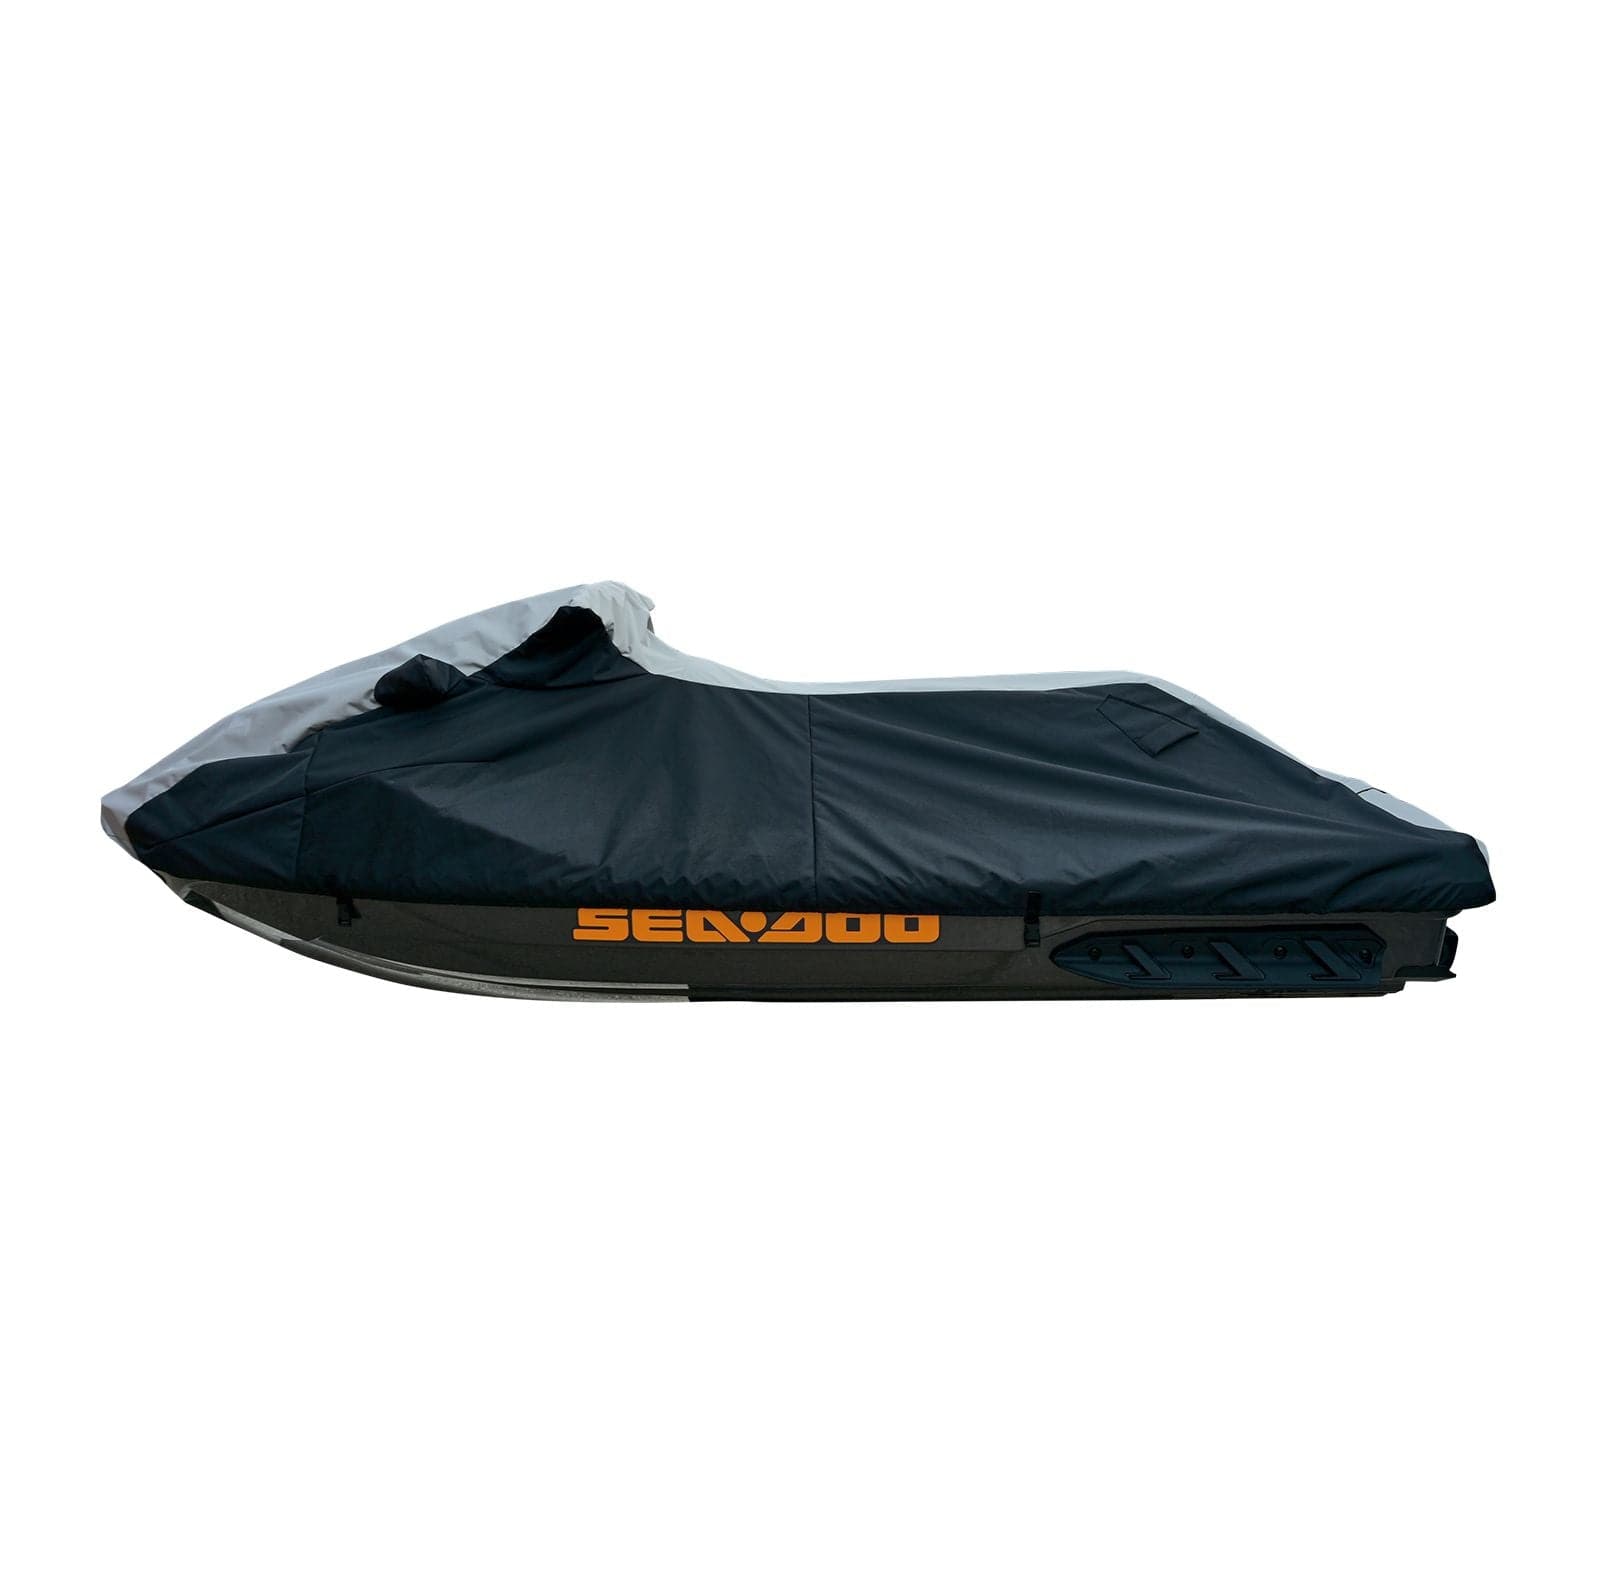 Trailerable Storage cover with vents for Sea-Doo 1993-1996 XP, XP 800/ 1995-1999 SPX